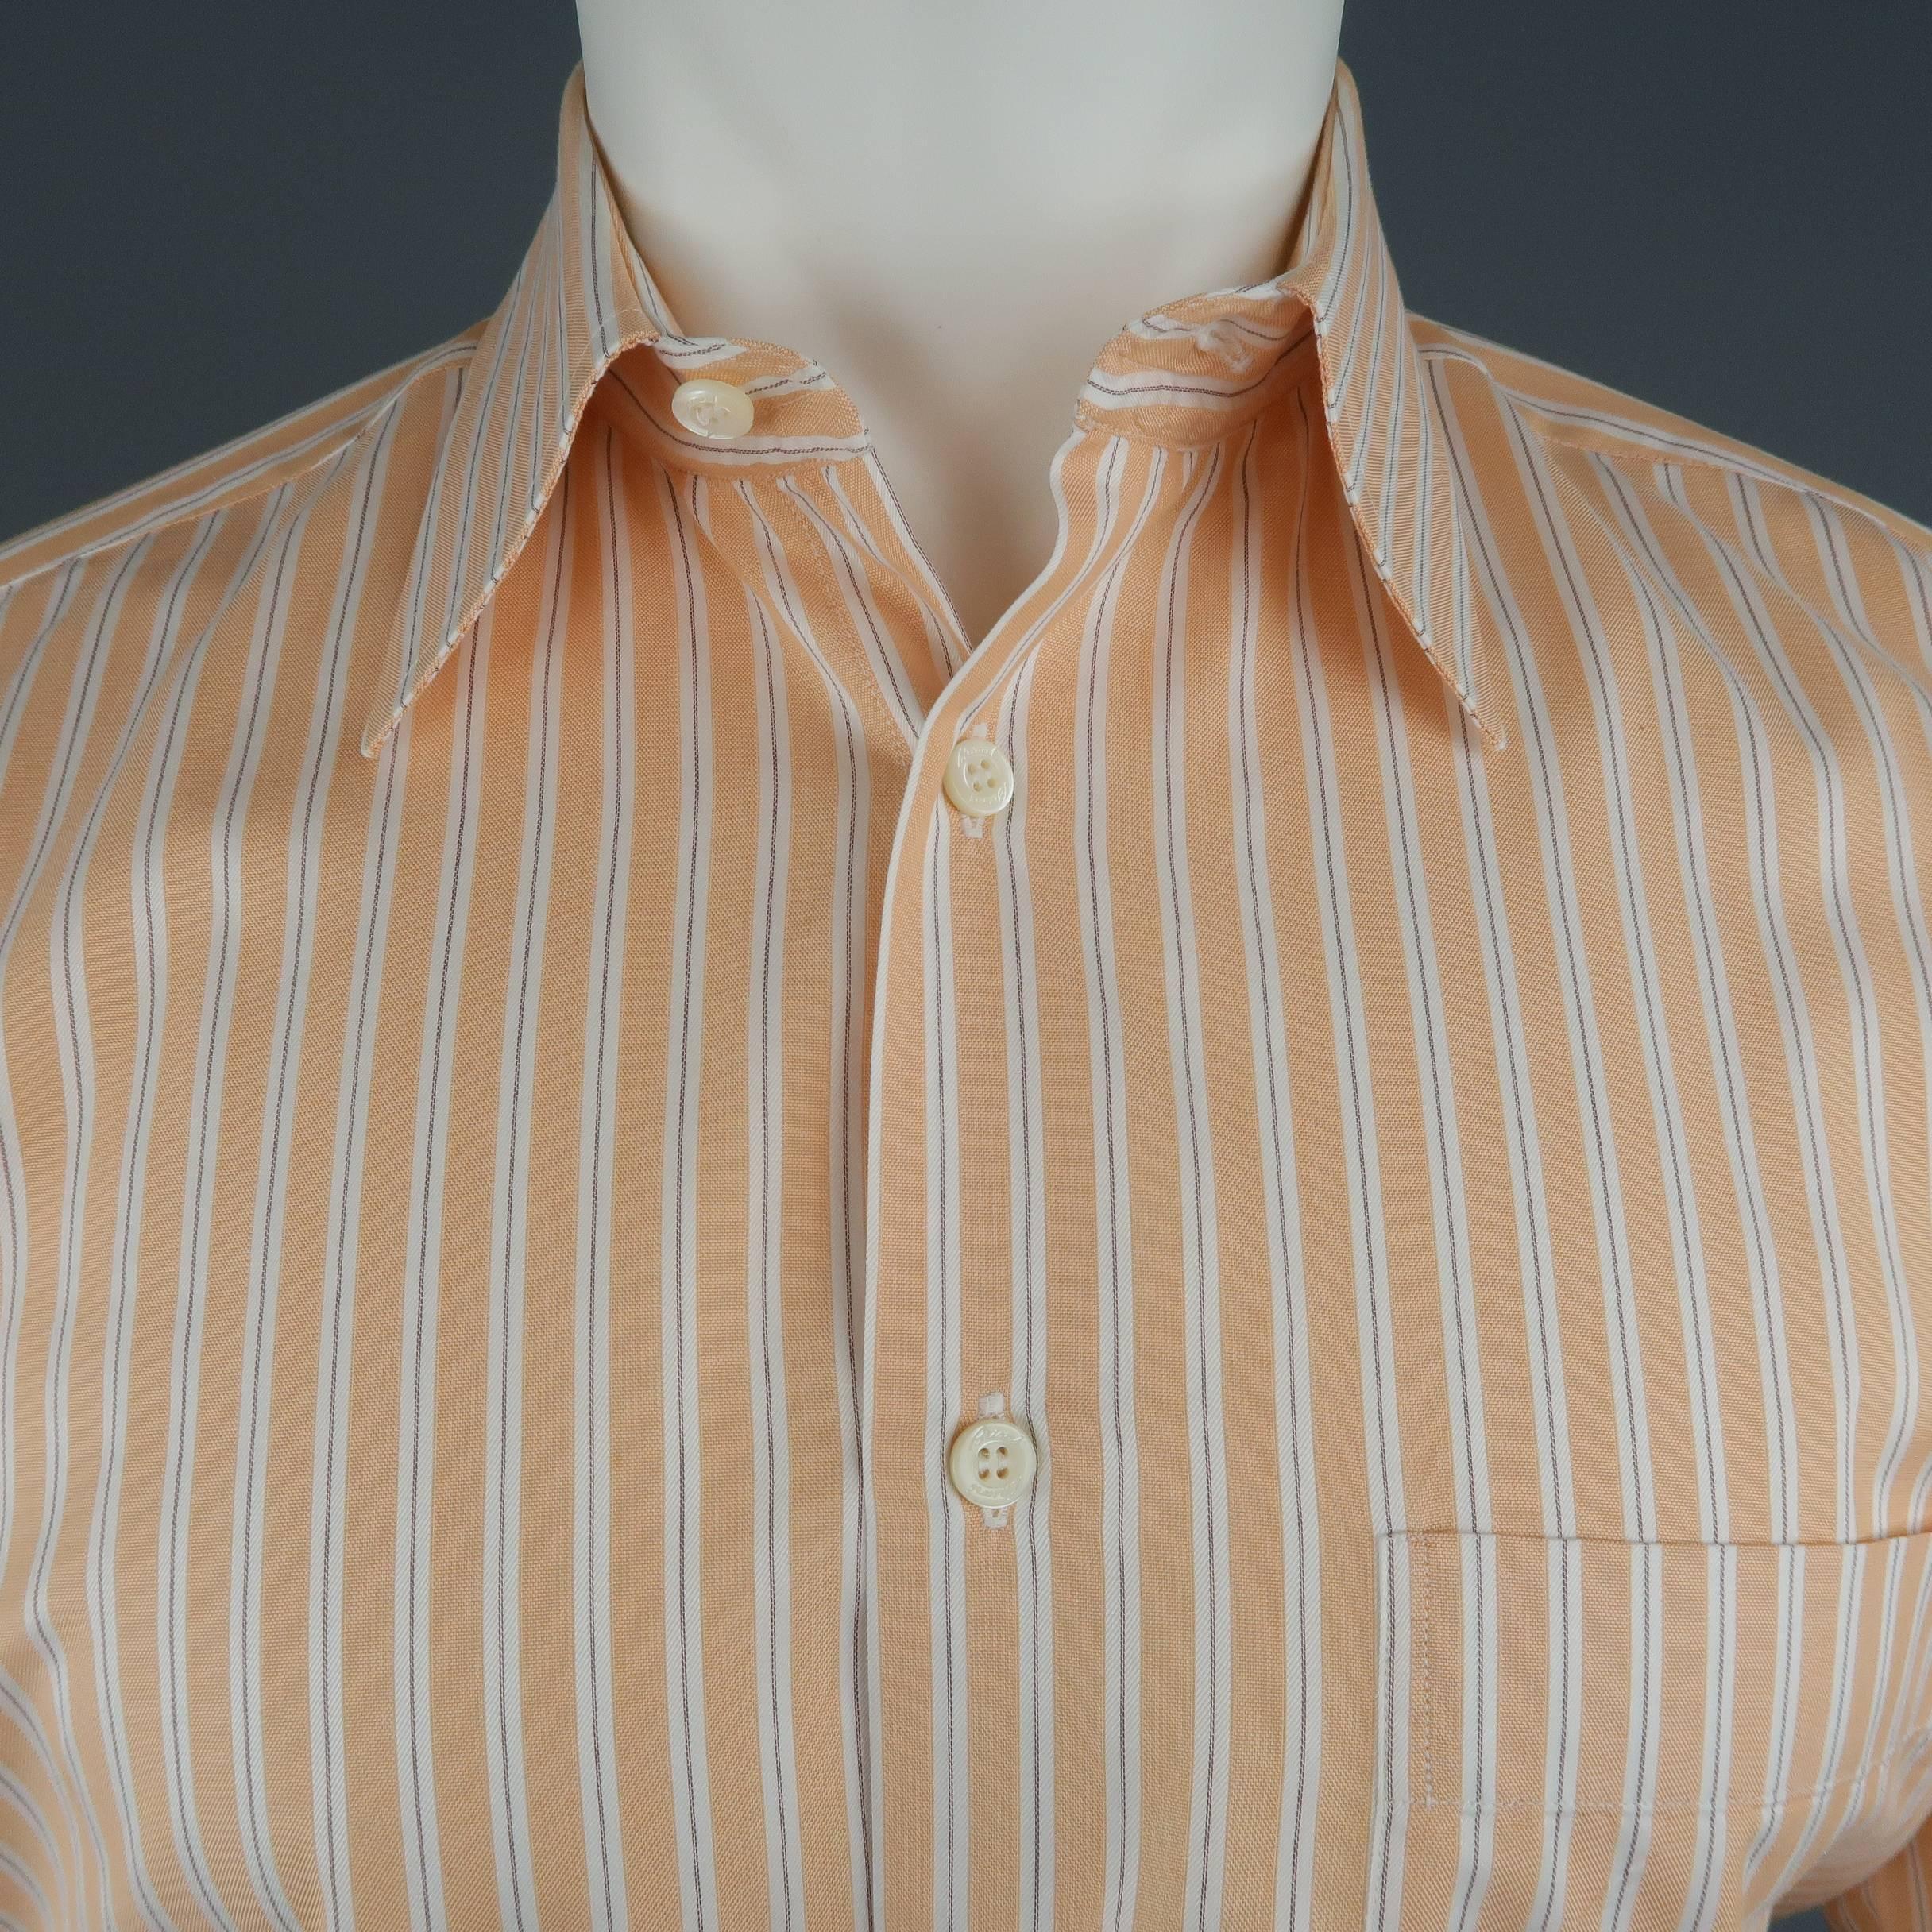 Classic BRIONI dress shirt comes in striped cotton with a pointed  collar. Made in Italy.
 
Good Pre-Owned Condition.
Marked: S
 
Measurements:
 
Shoulder: 17 in.
Chest: 46 in.
Sleeve:  23 in.
Length: 31 in.
